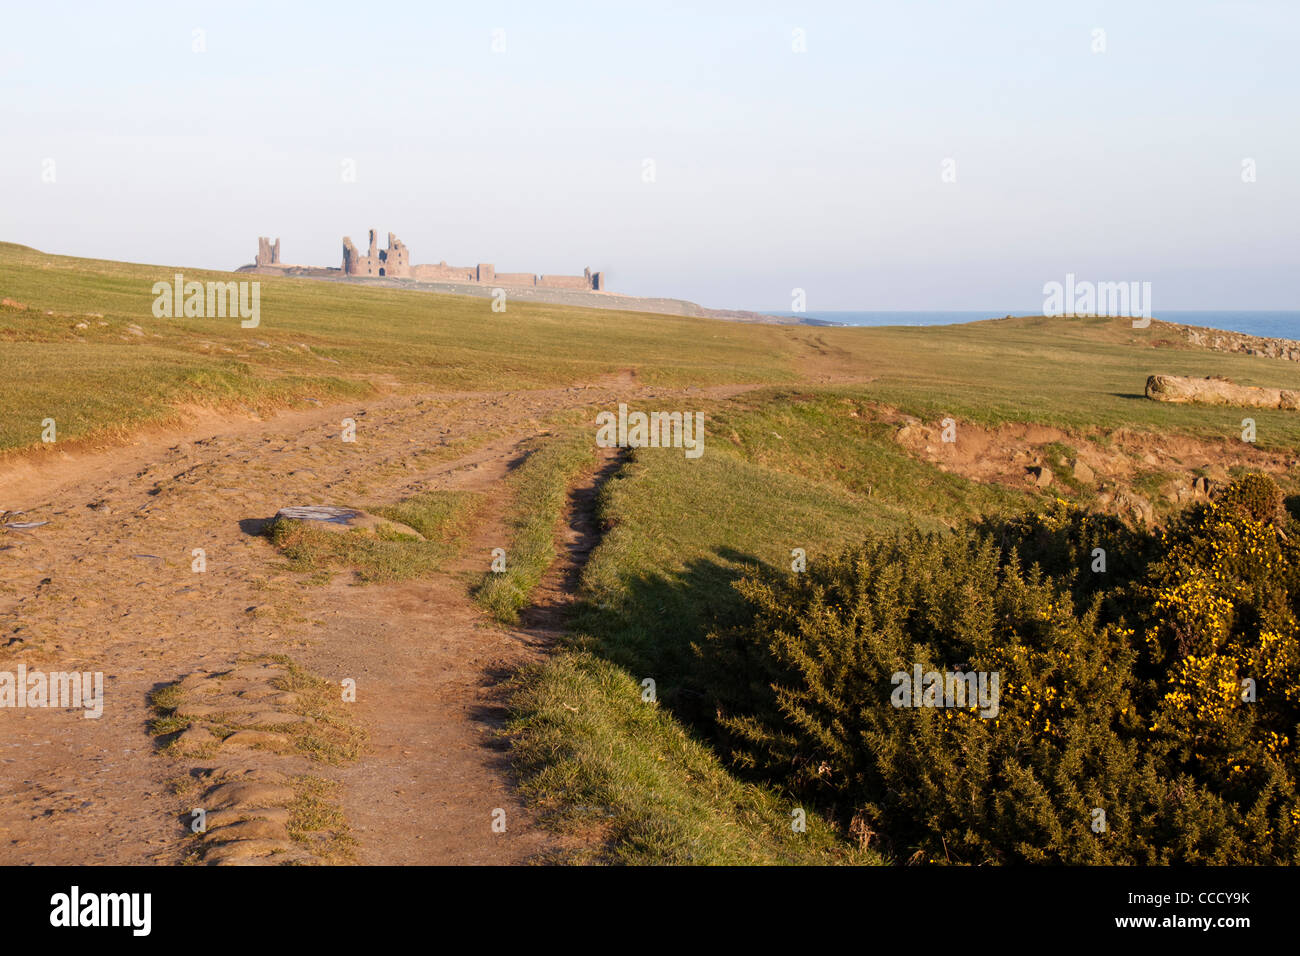 Dunstanburgh Castle.An iconic castle ruin, once one of the largest and grandest fortifications in Northern England. Stock Photo